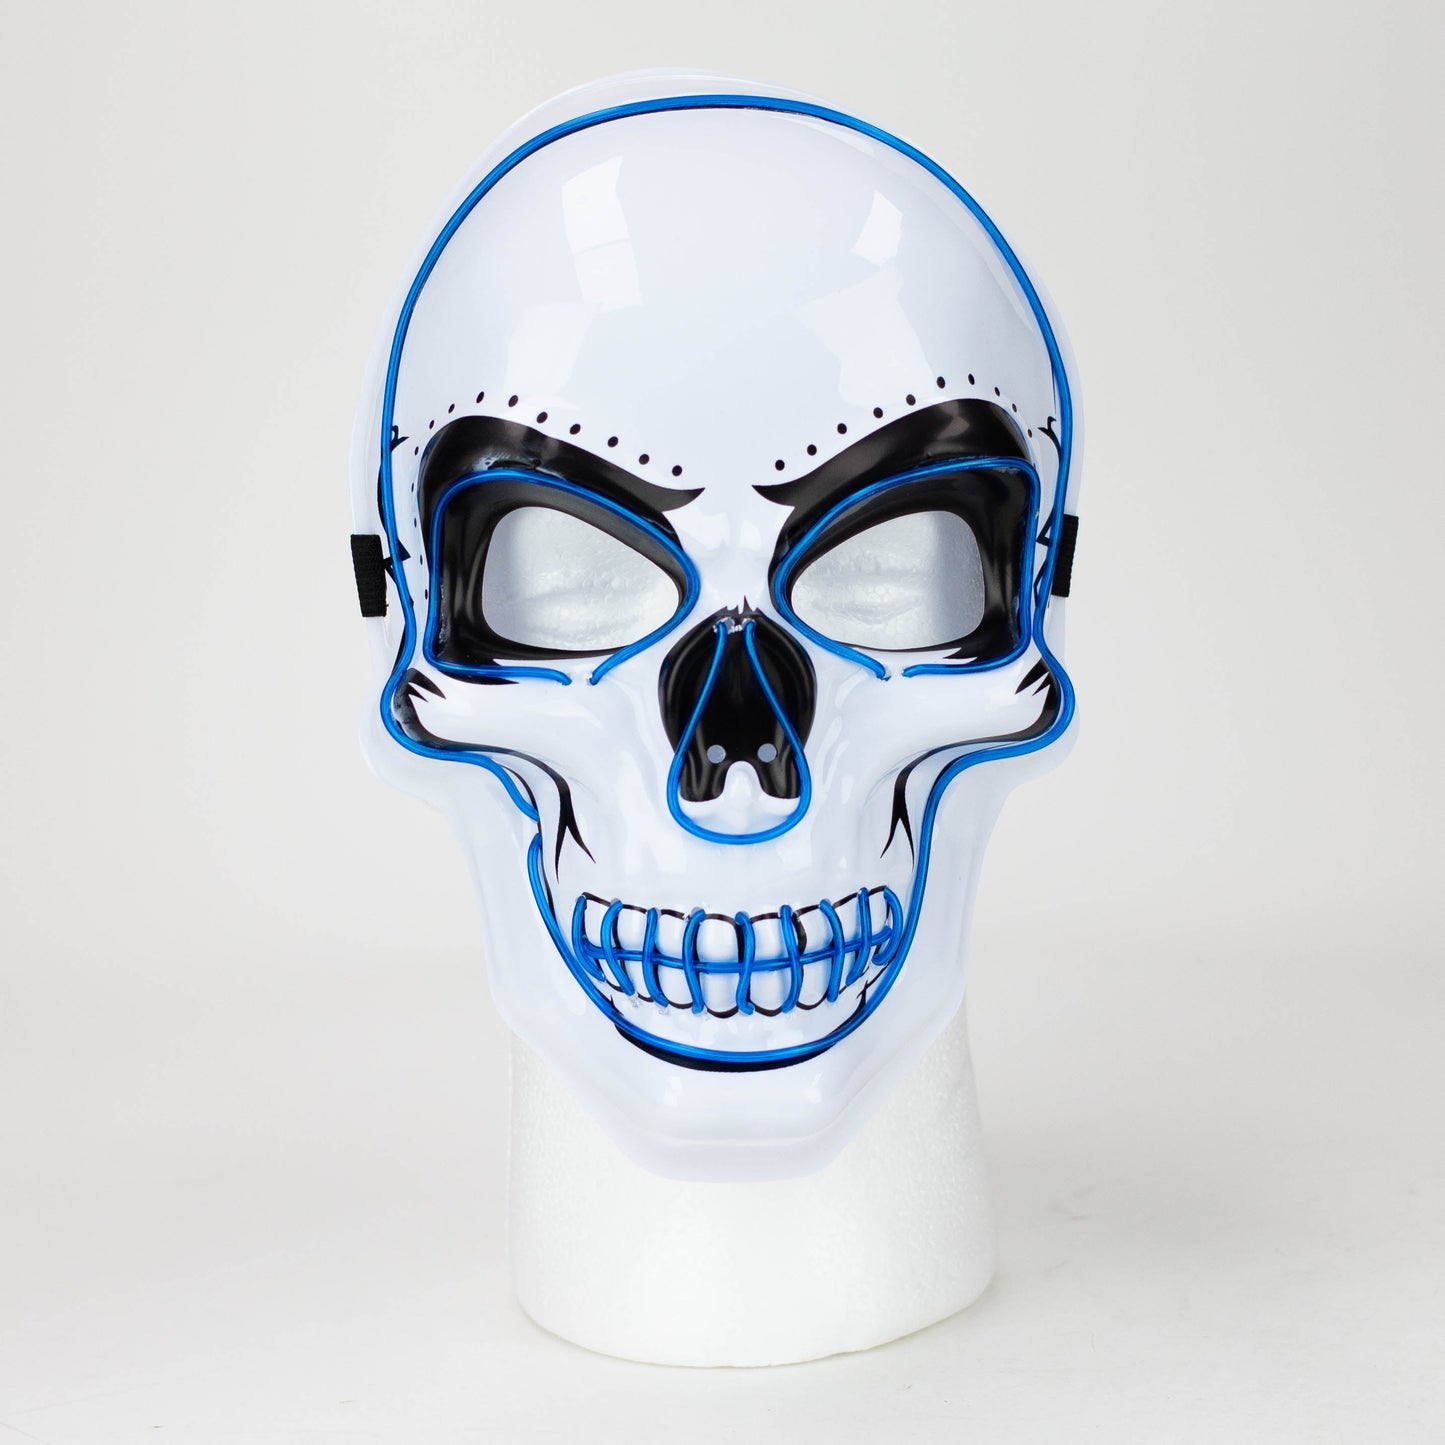 LED Neon Skull Mask for party or Halloween Costume_3